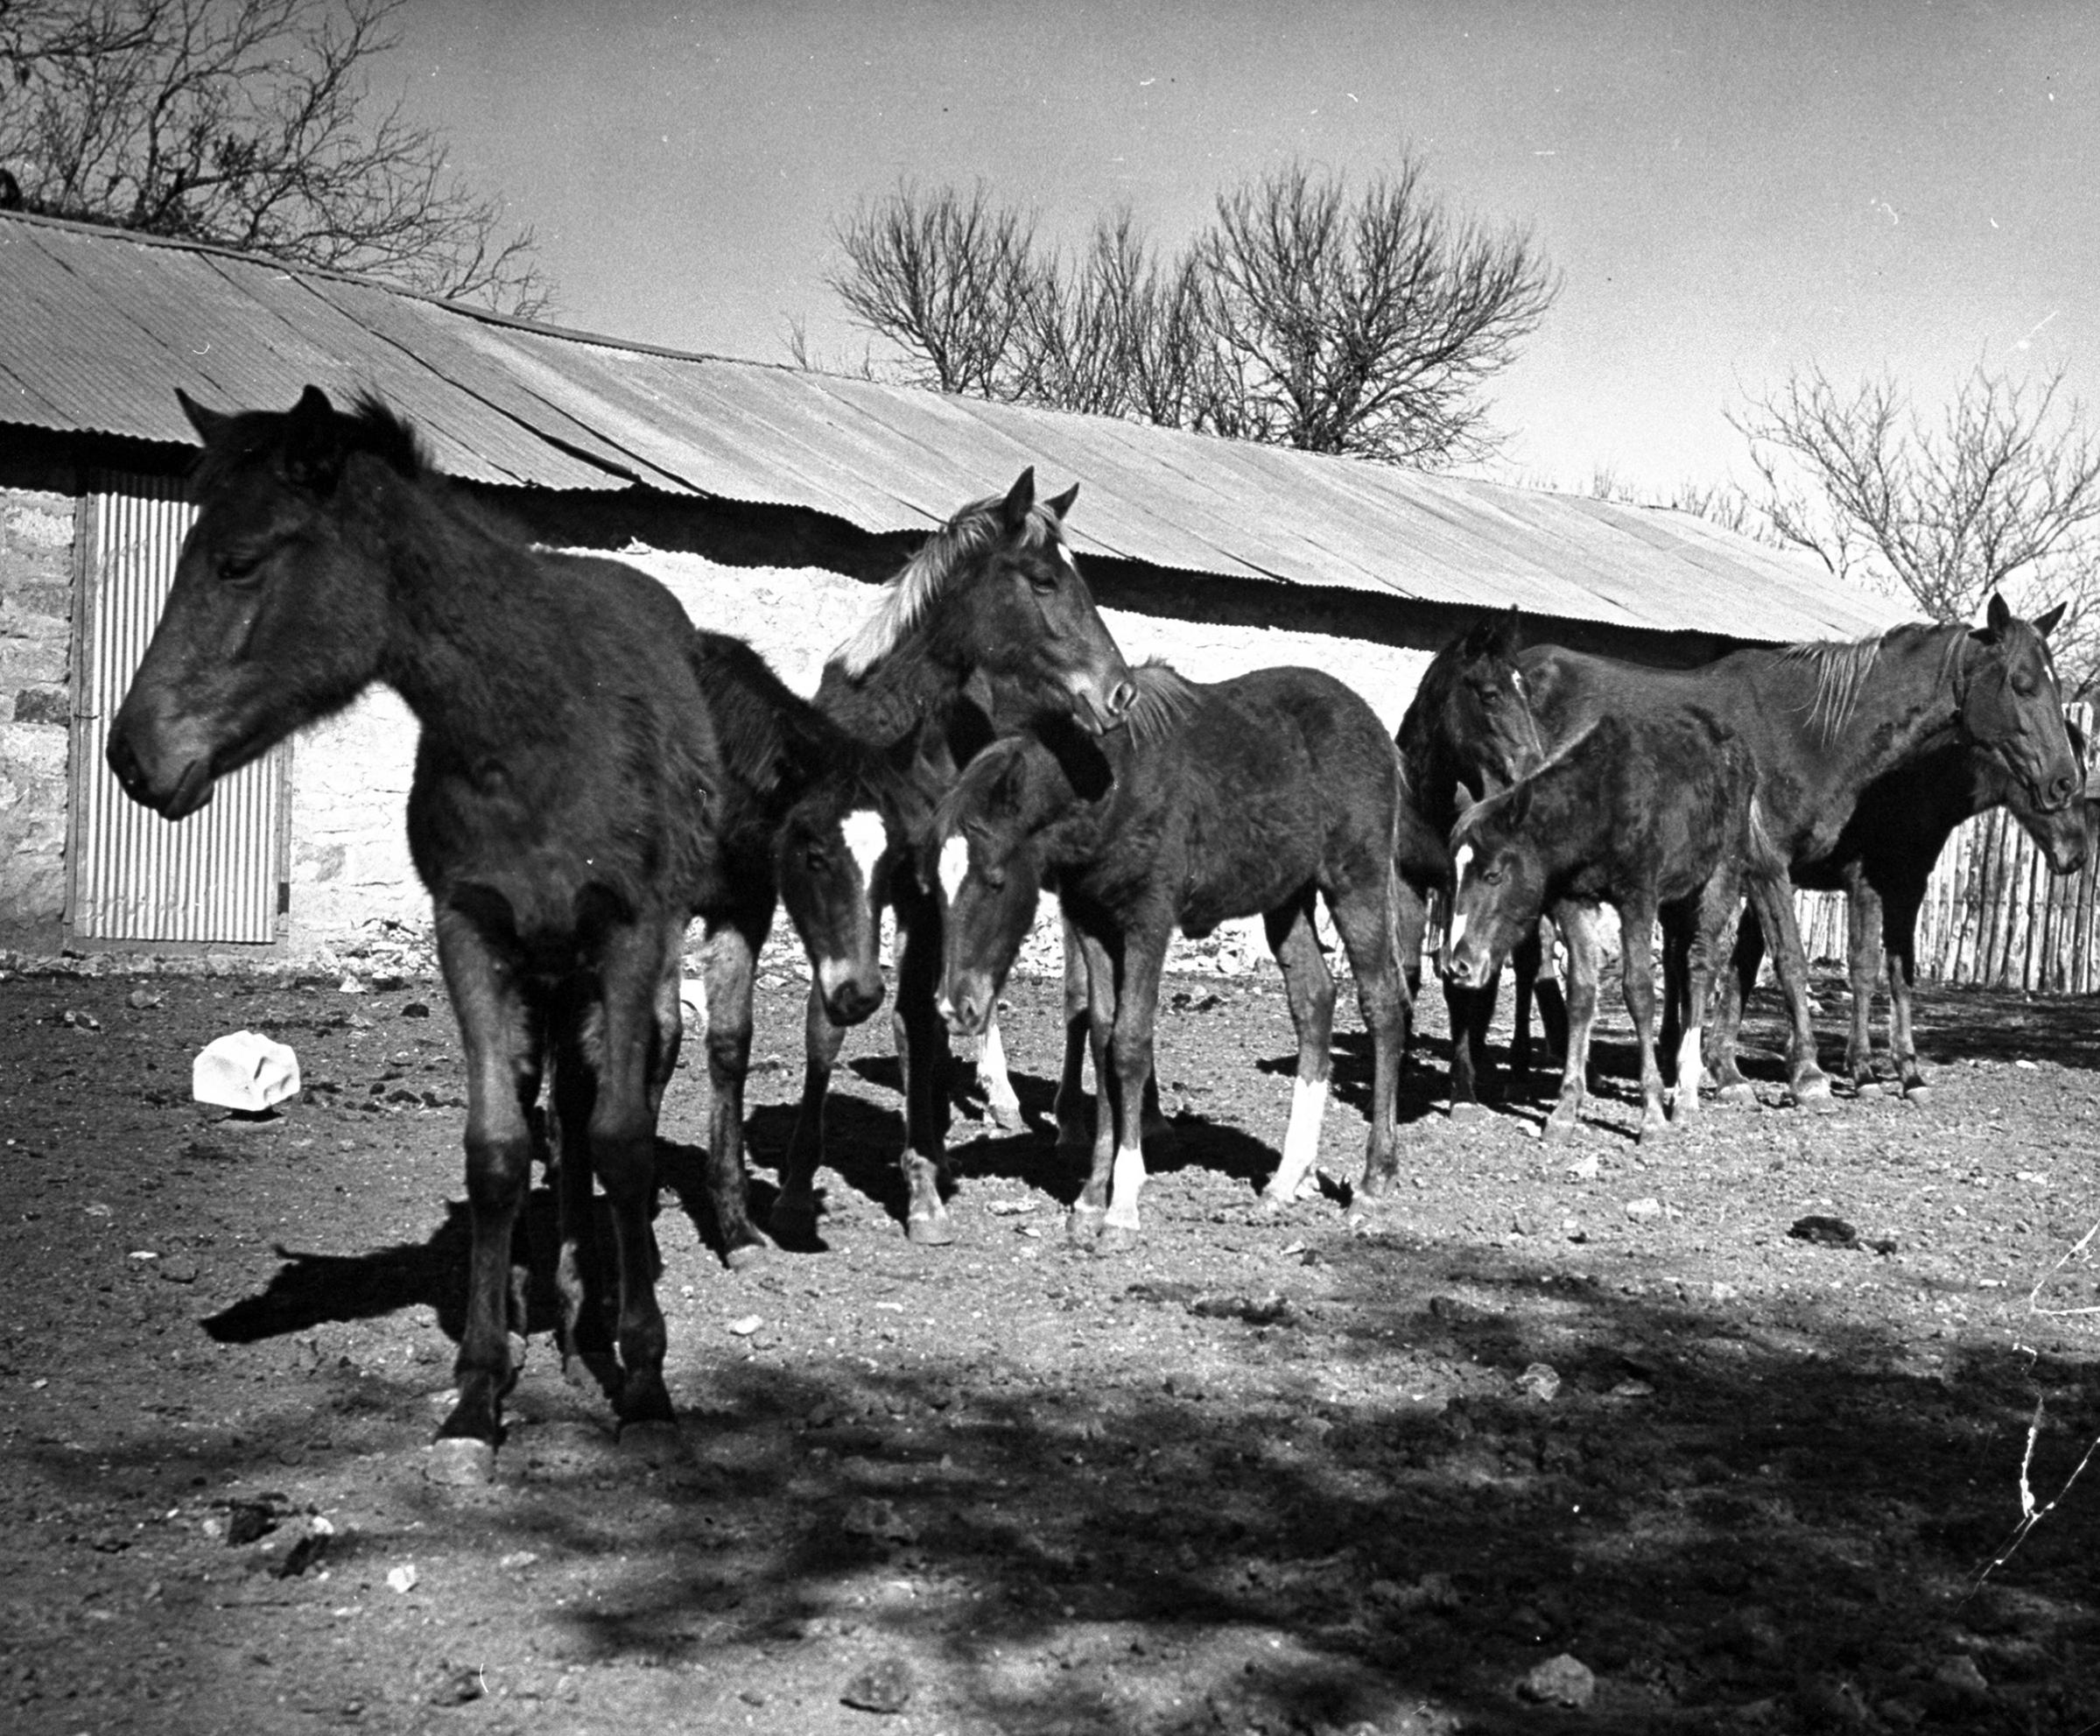 Polo ponies standing in corral at the Peachtree Ranch in Texas, 1939.